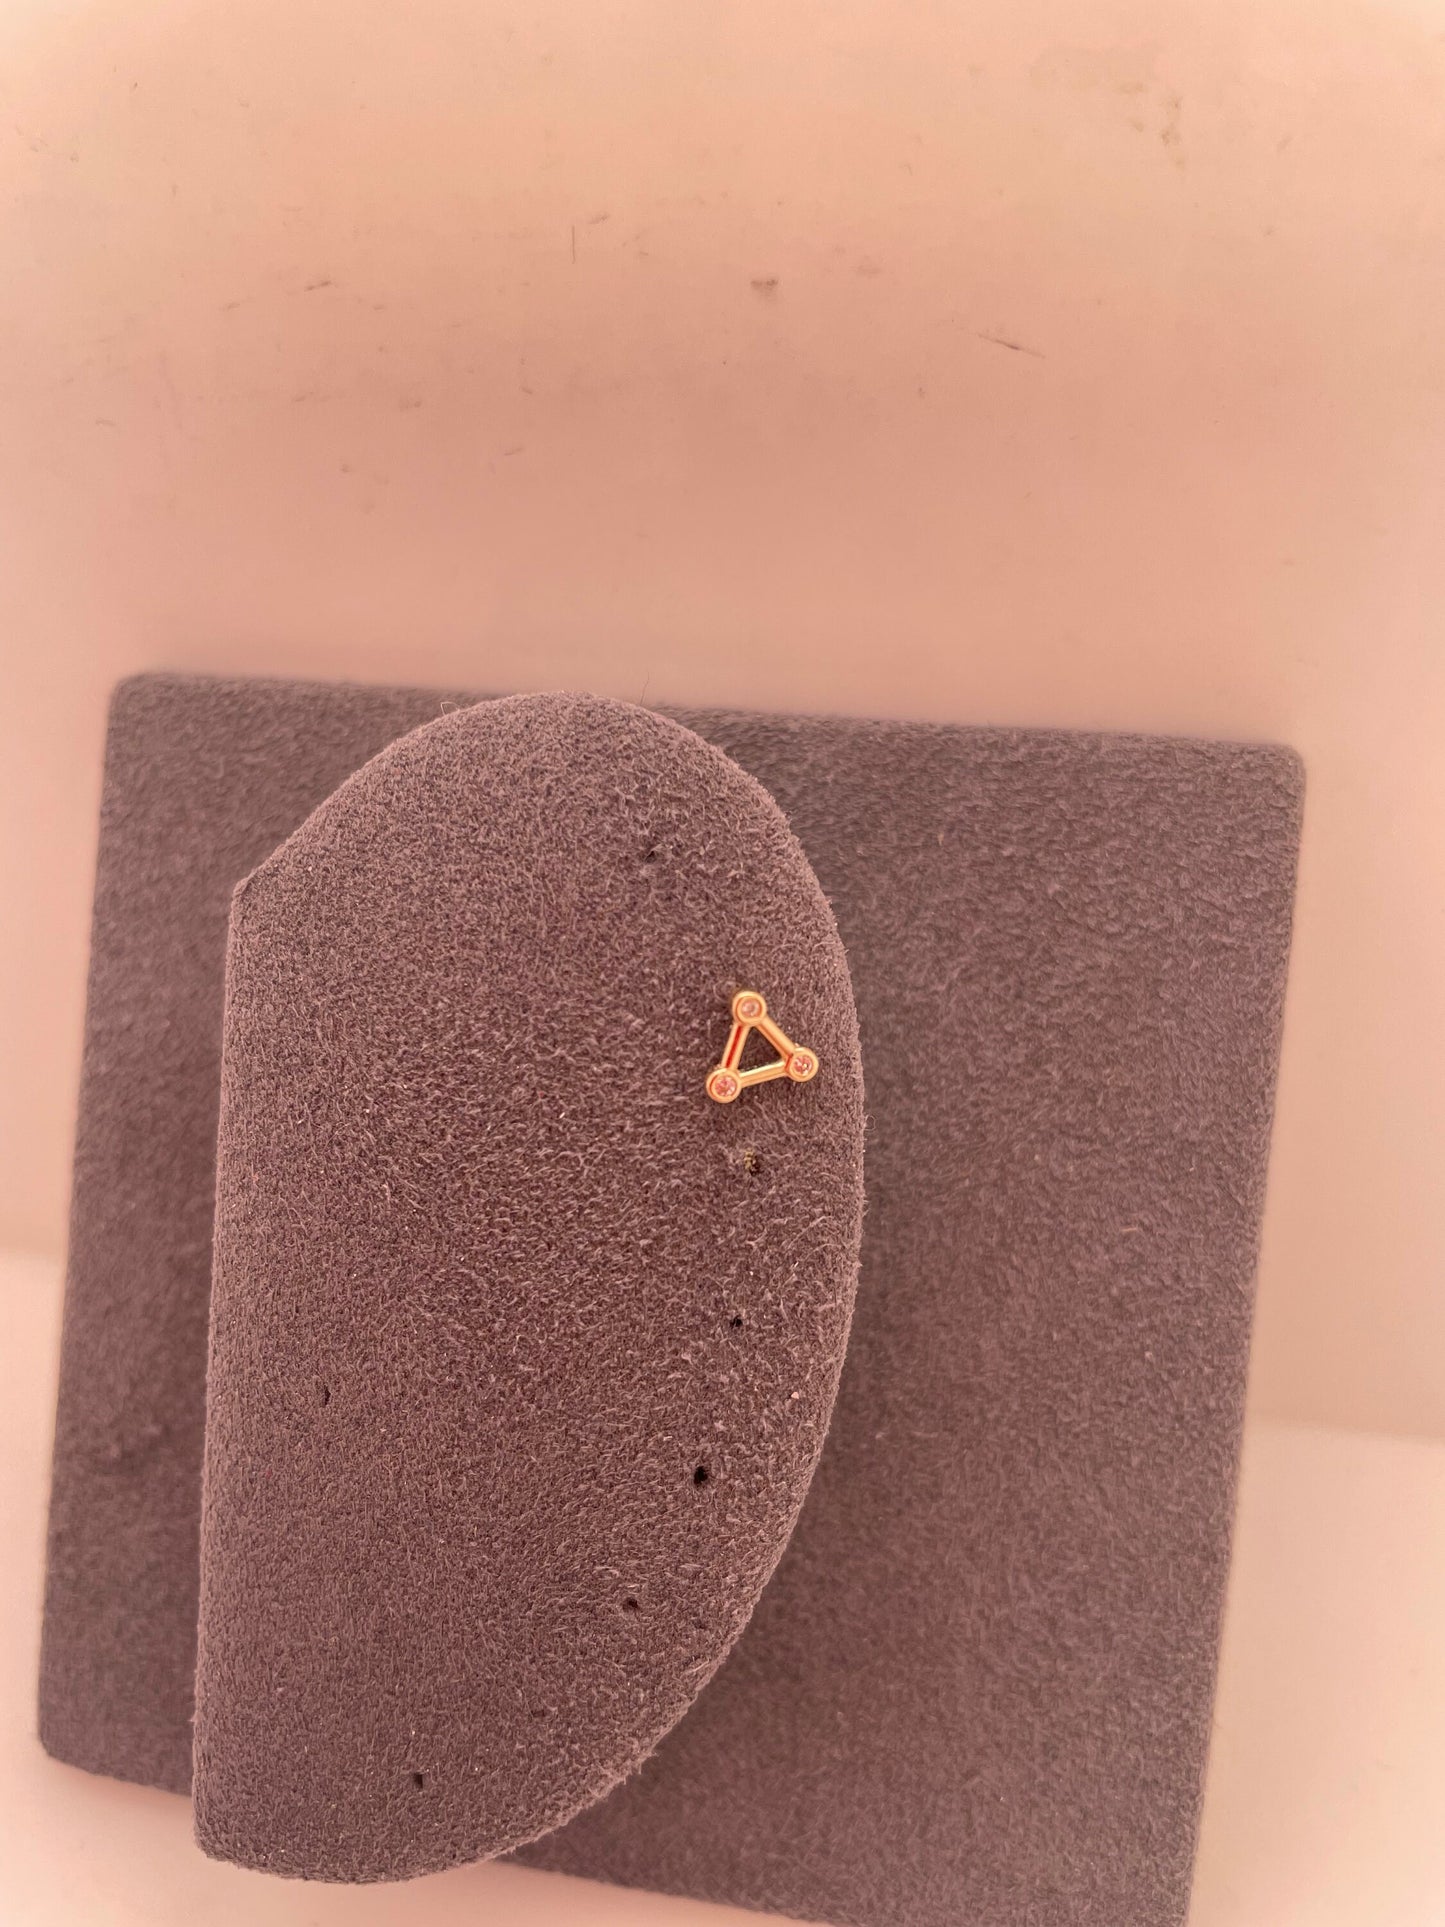 Triangle Gold Piercing